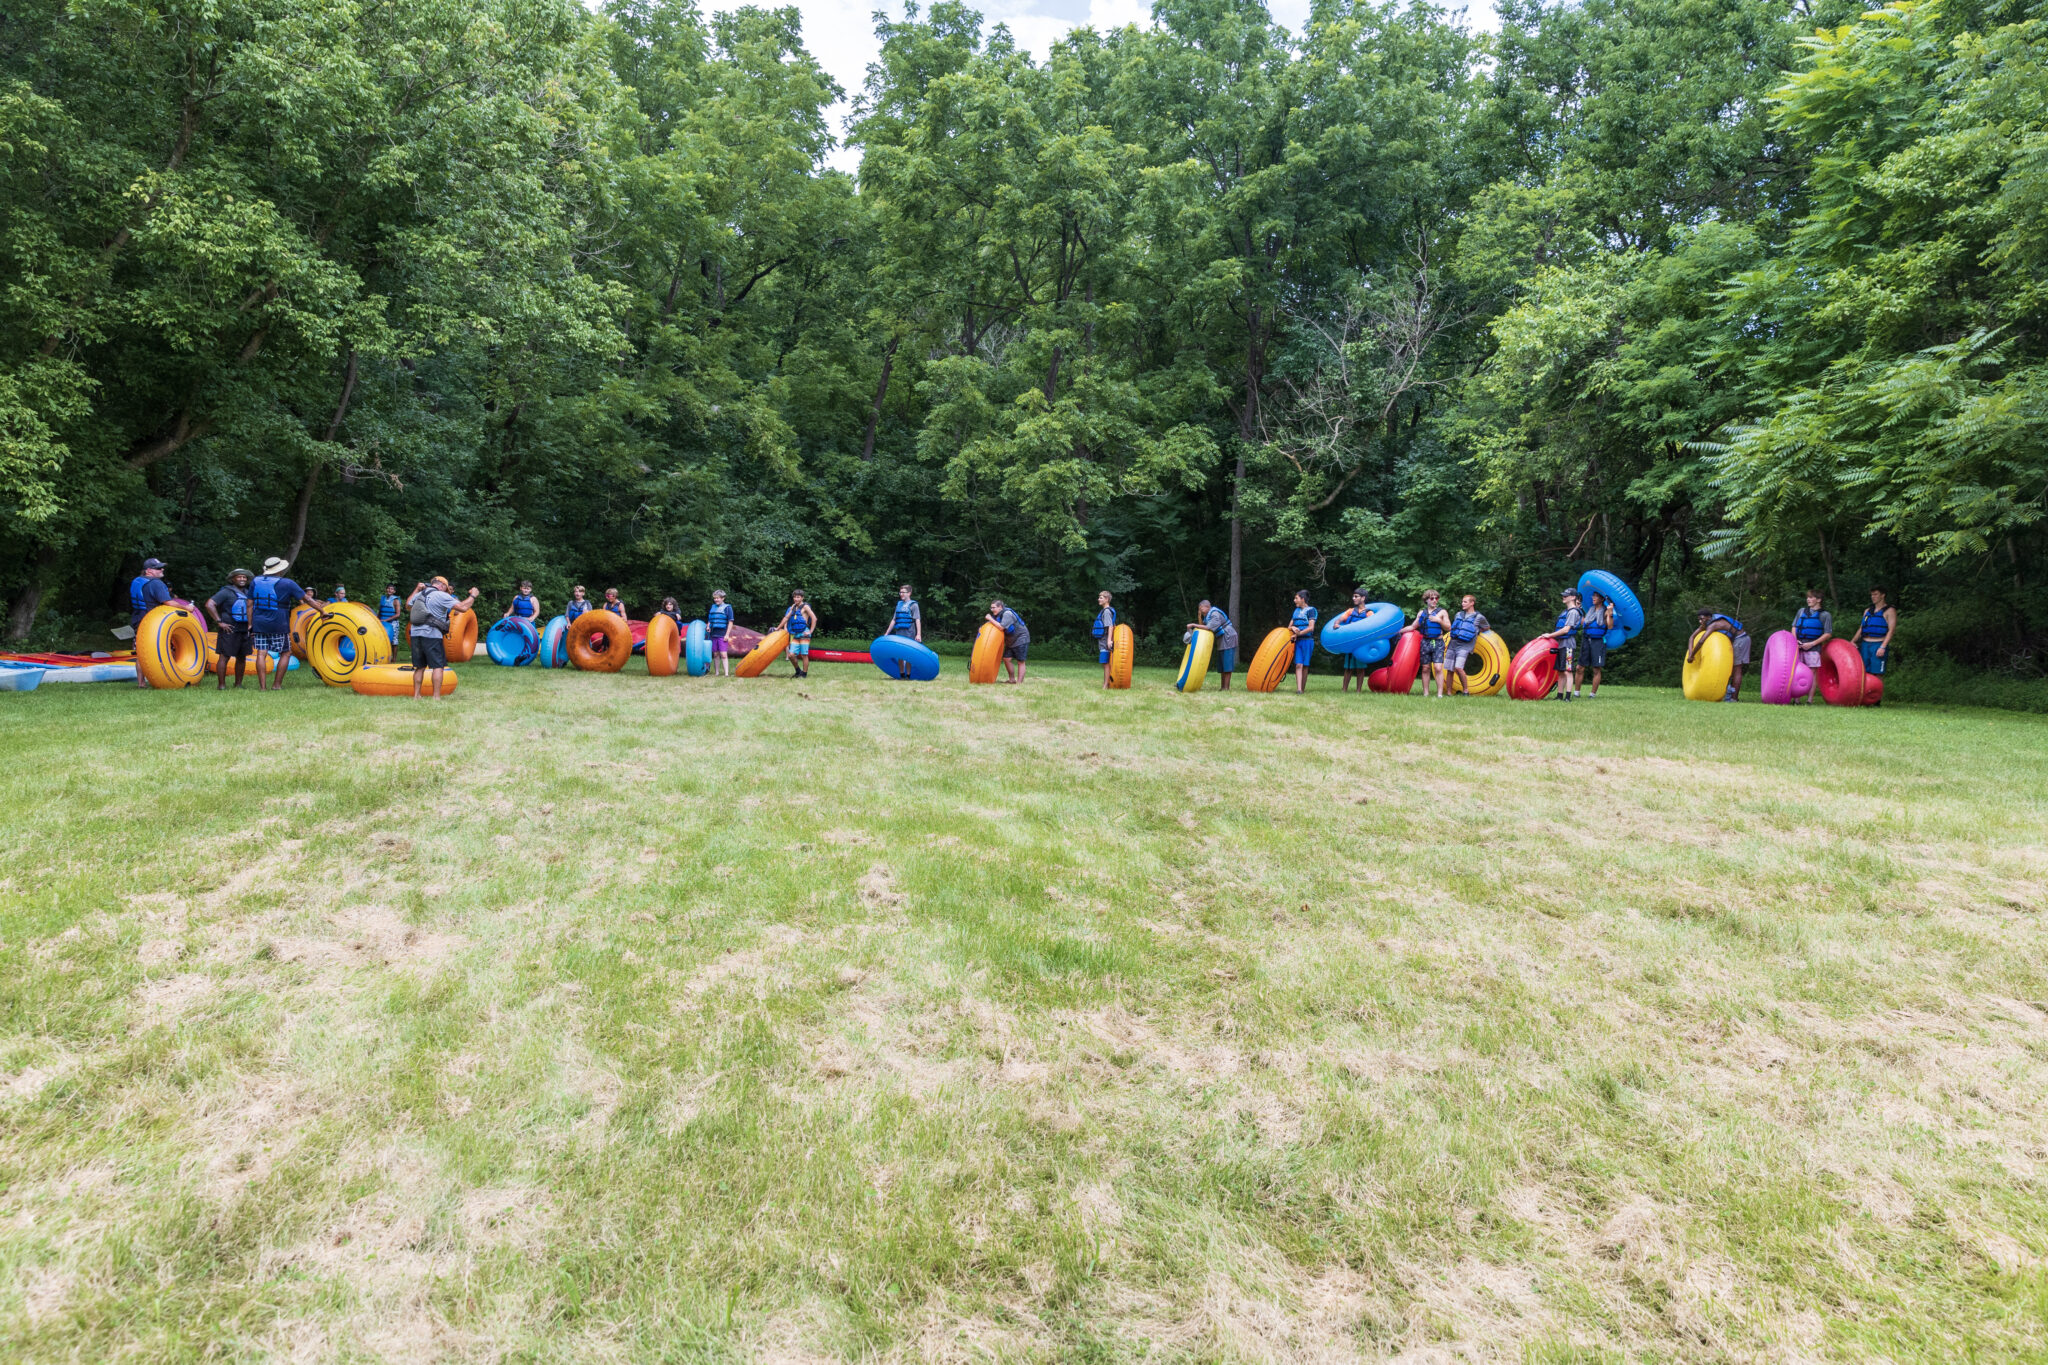 A group of people participating in the P.L.E.D.G.E. Leadership Program, standing in a grassy area with rafts.